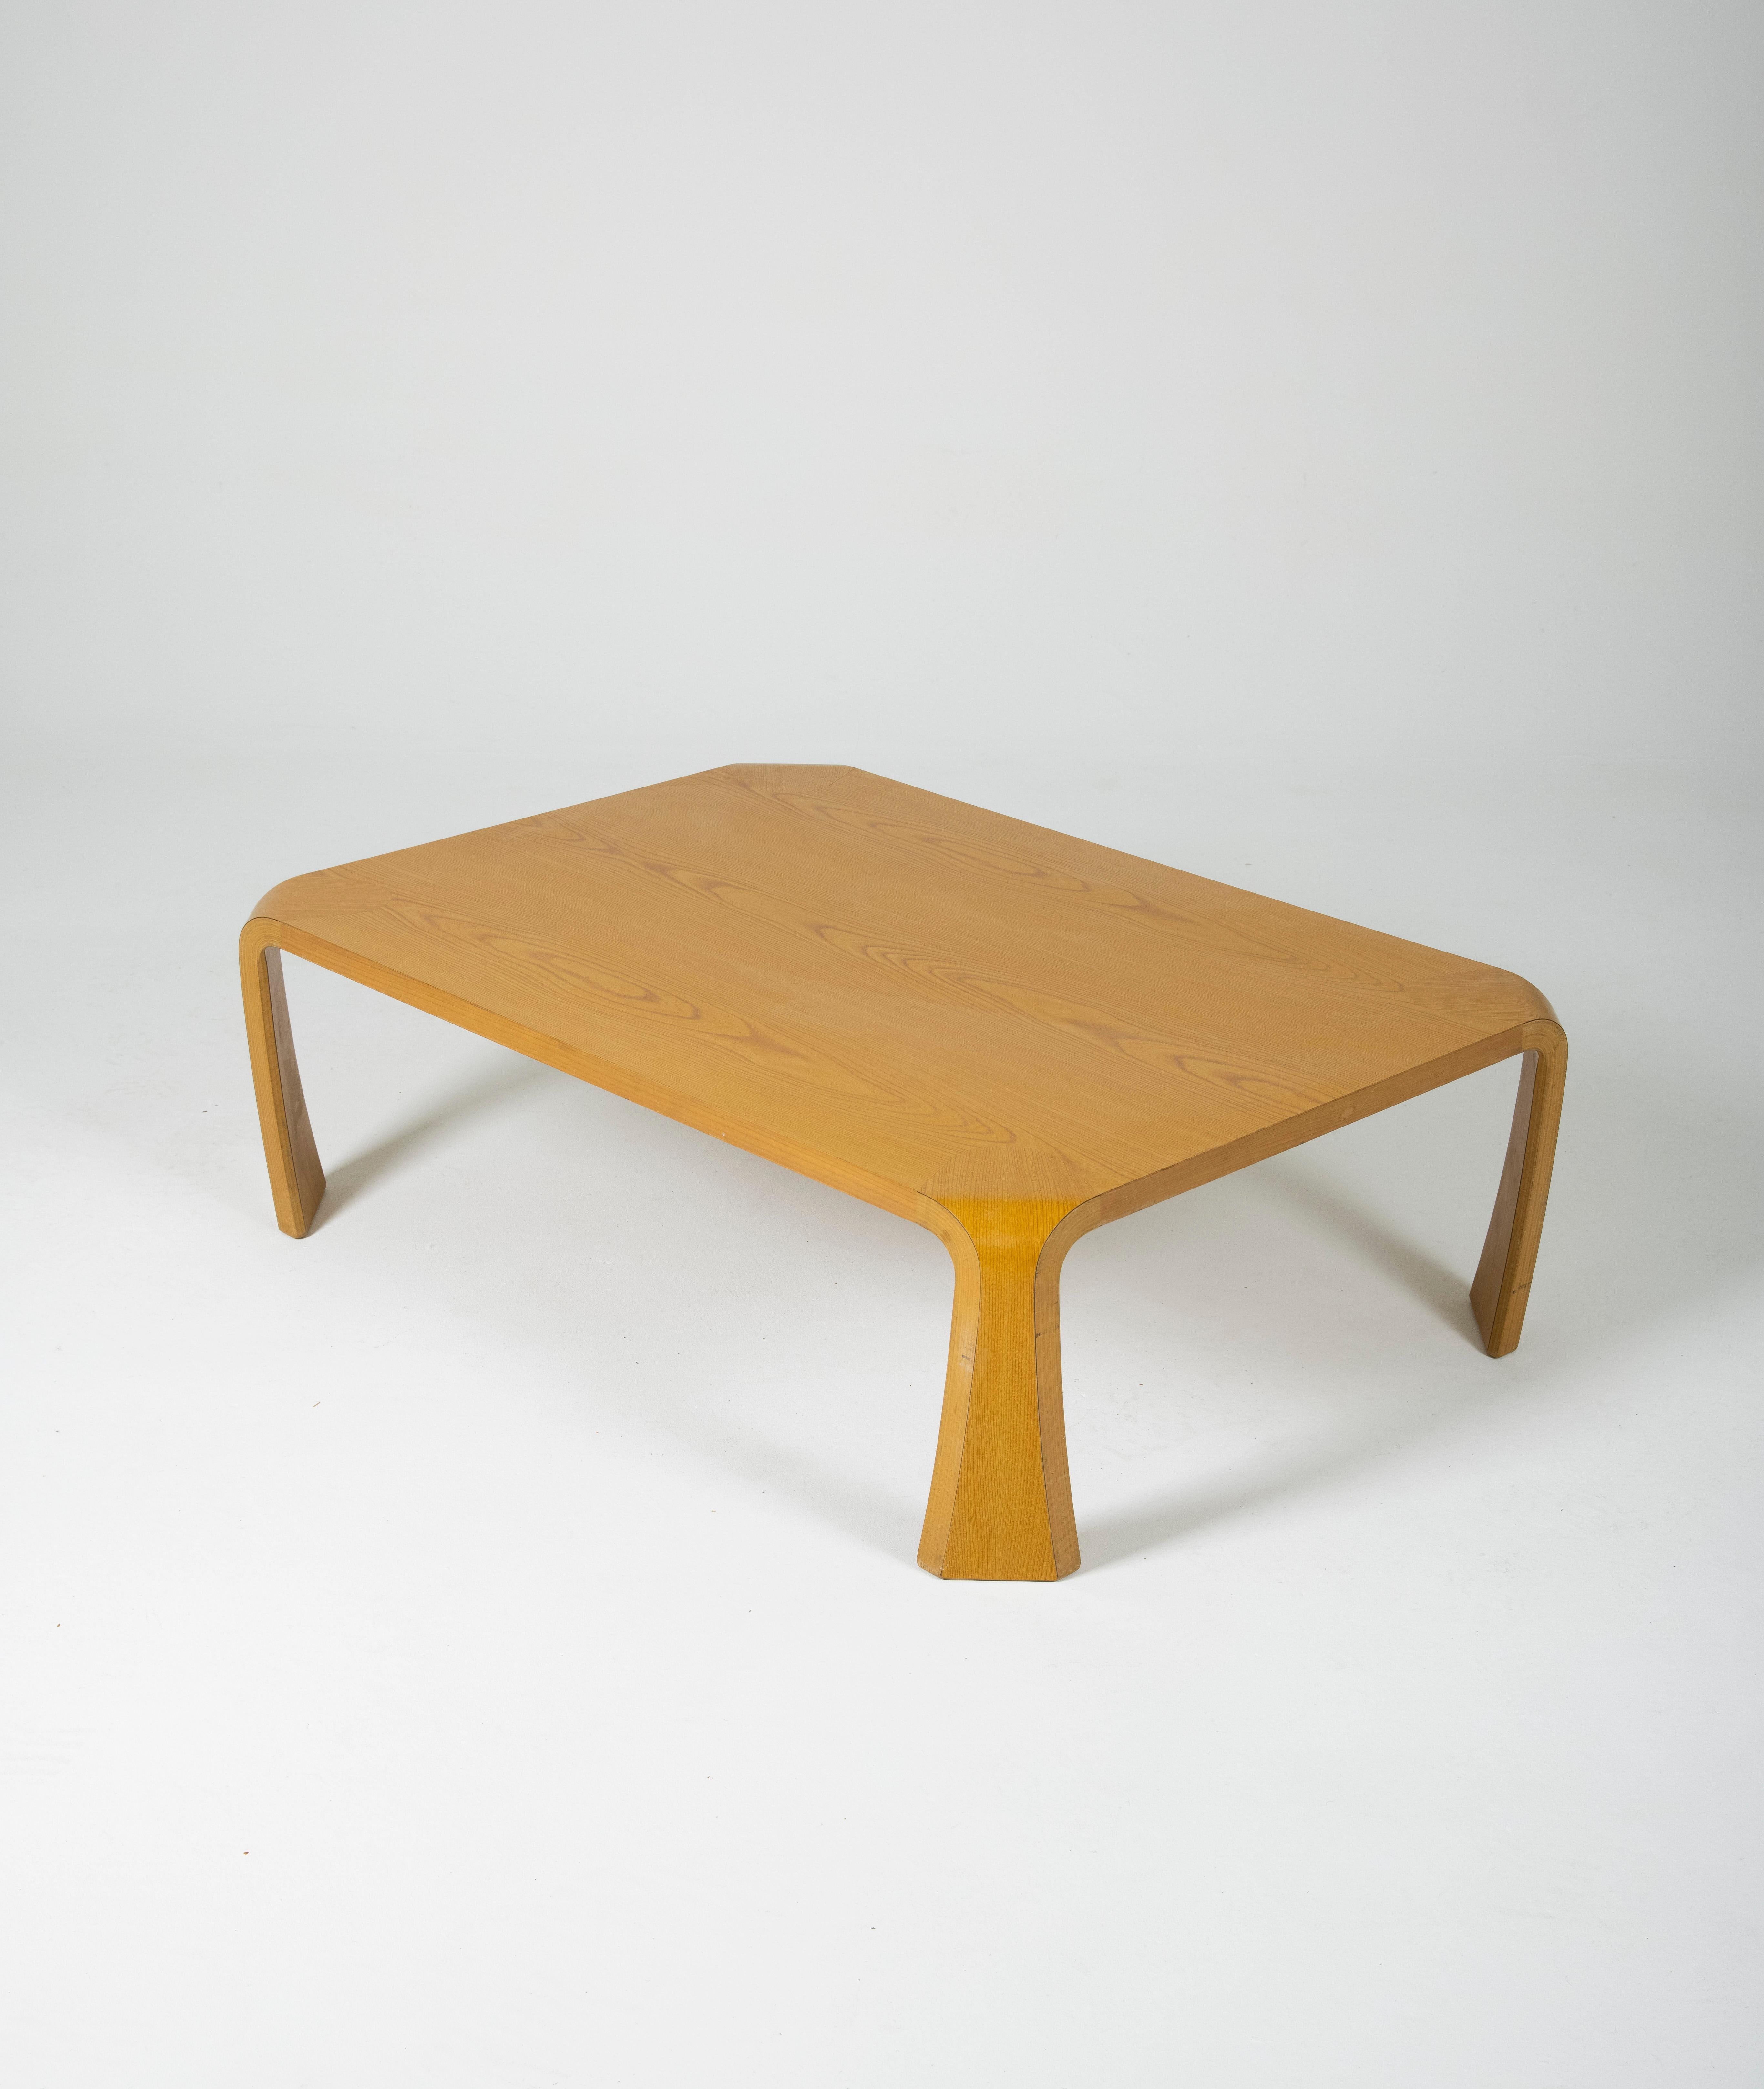 Coffee table Saburo Inui for Tendo Mokko in Japan in the 1960s. Rectangular tabletop made of melamine wood and curved legs. Good vintage condition.
LP597-598